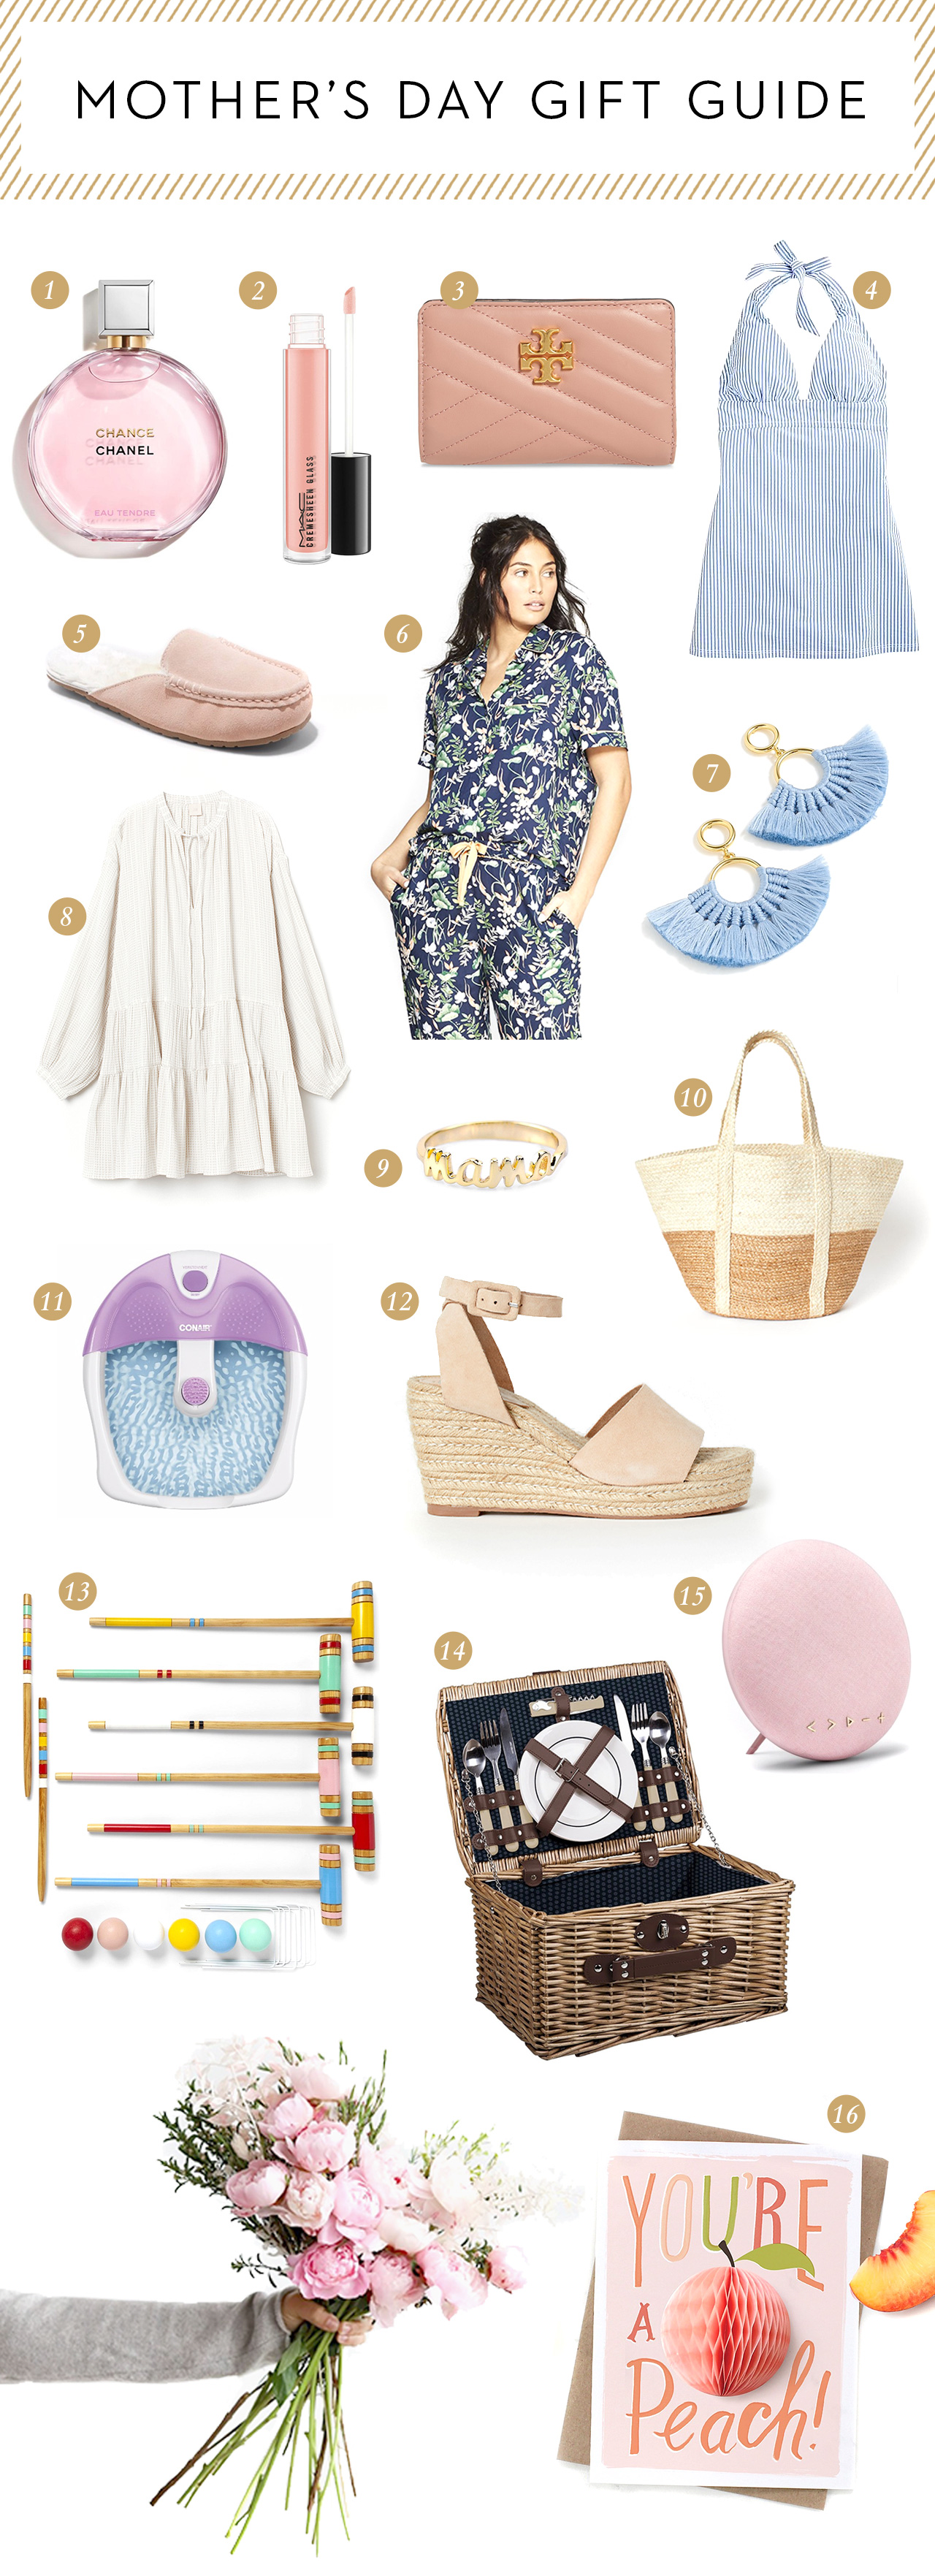 Thoughtful Gift Ideas for Moms